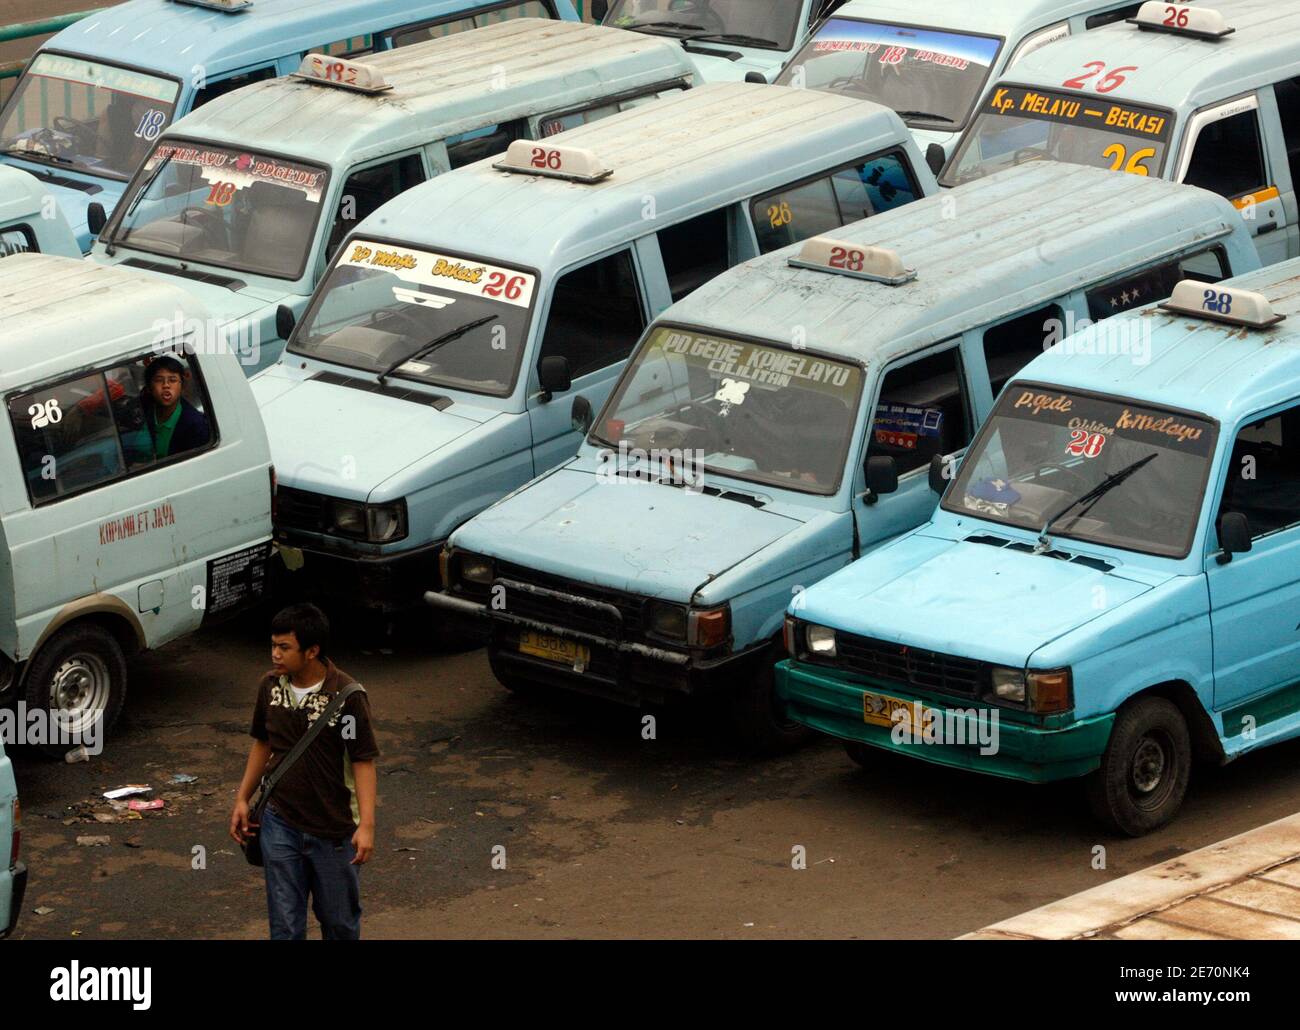 The 1990s model of the Toyota Kijang used for public transportation is parked along a Jakarta street as it waits for passengers November 16, 2007. The Kijang, which mean 'deer' in Bahasa Indonesia, was first launched in Indonesia in 1977, as cheap-- and not so attractive-- pick-up truck that could easily navigate the country's bumpy and often packed roads.  REUTERS/Supri   (INDONESIA) Stock Photo